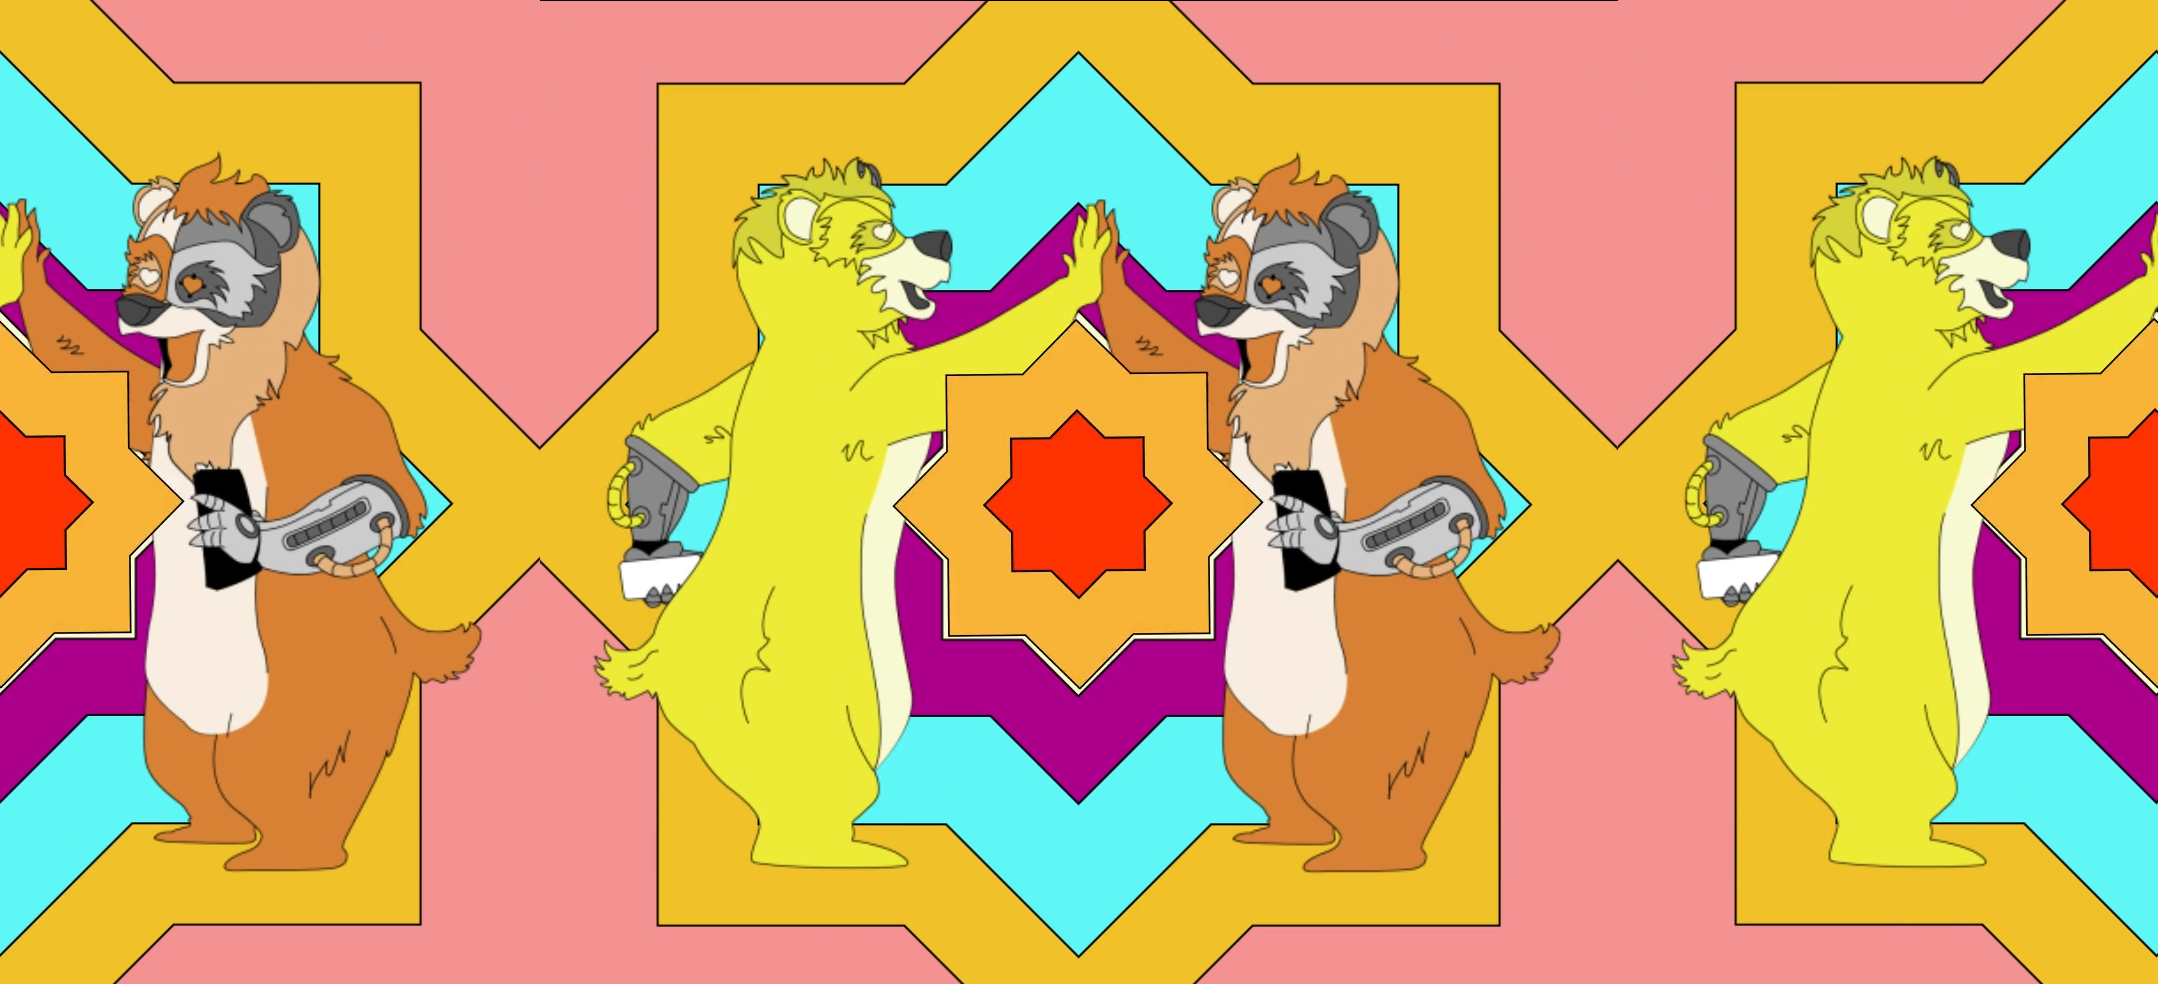 Two cyborg bears high-fiving with a star burst in the background